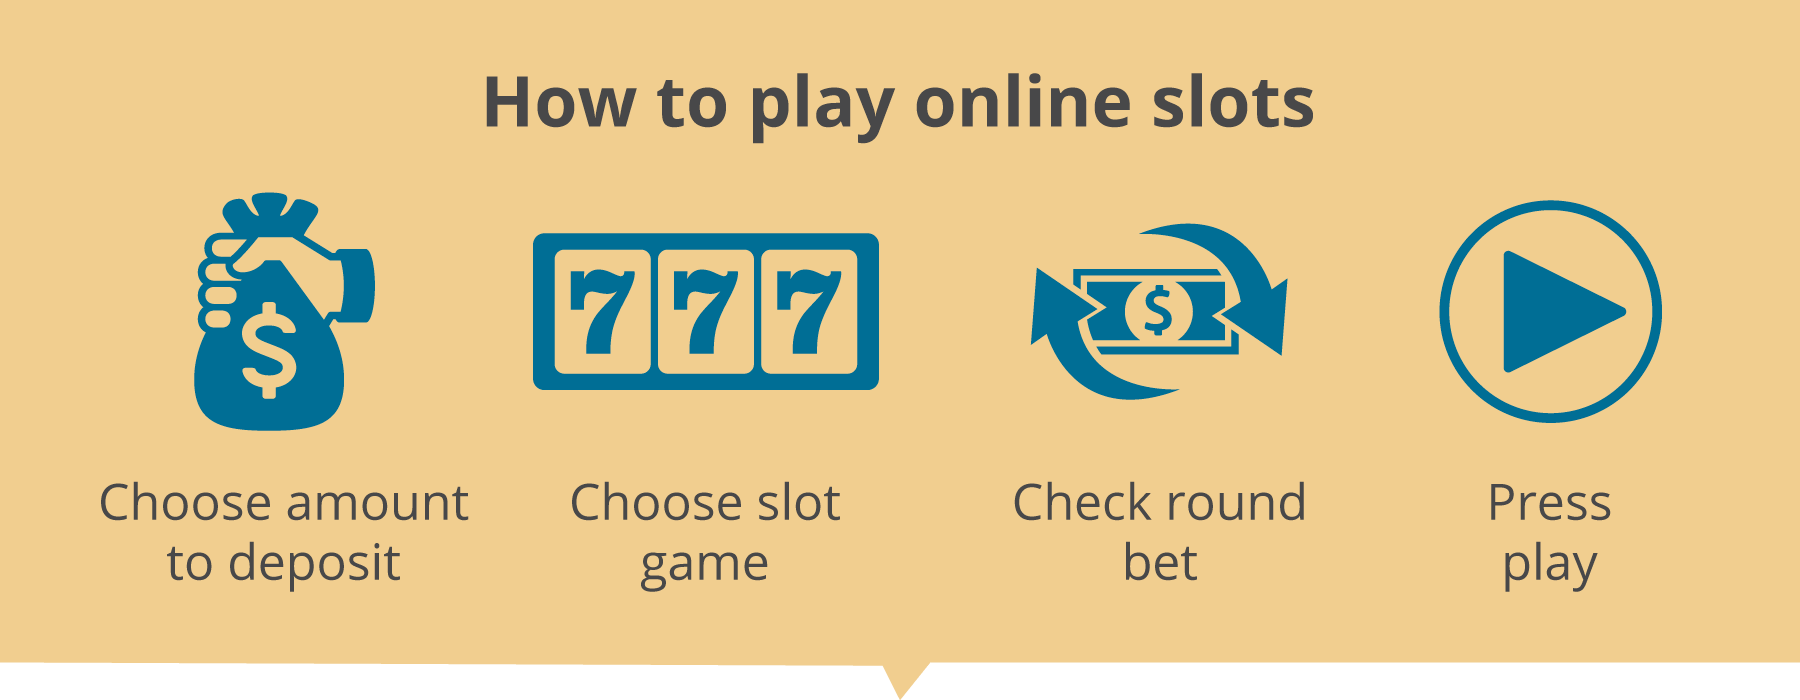 How to play Online Slots UAE - Emirates Casino Slot Guide